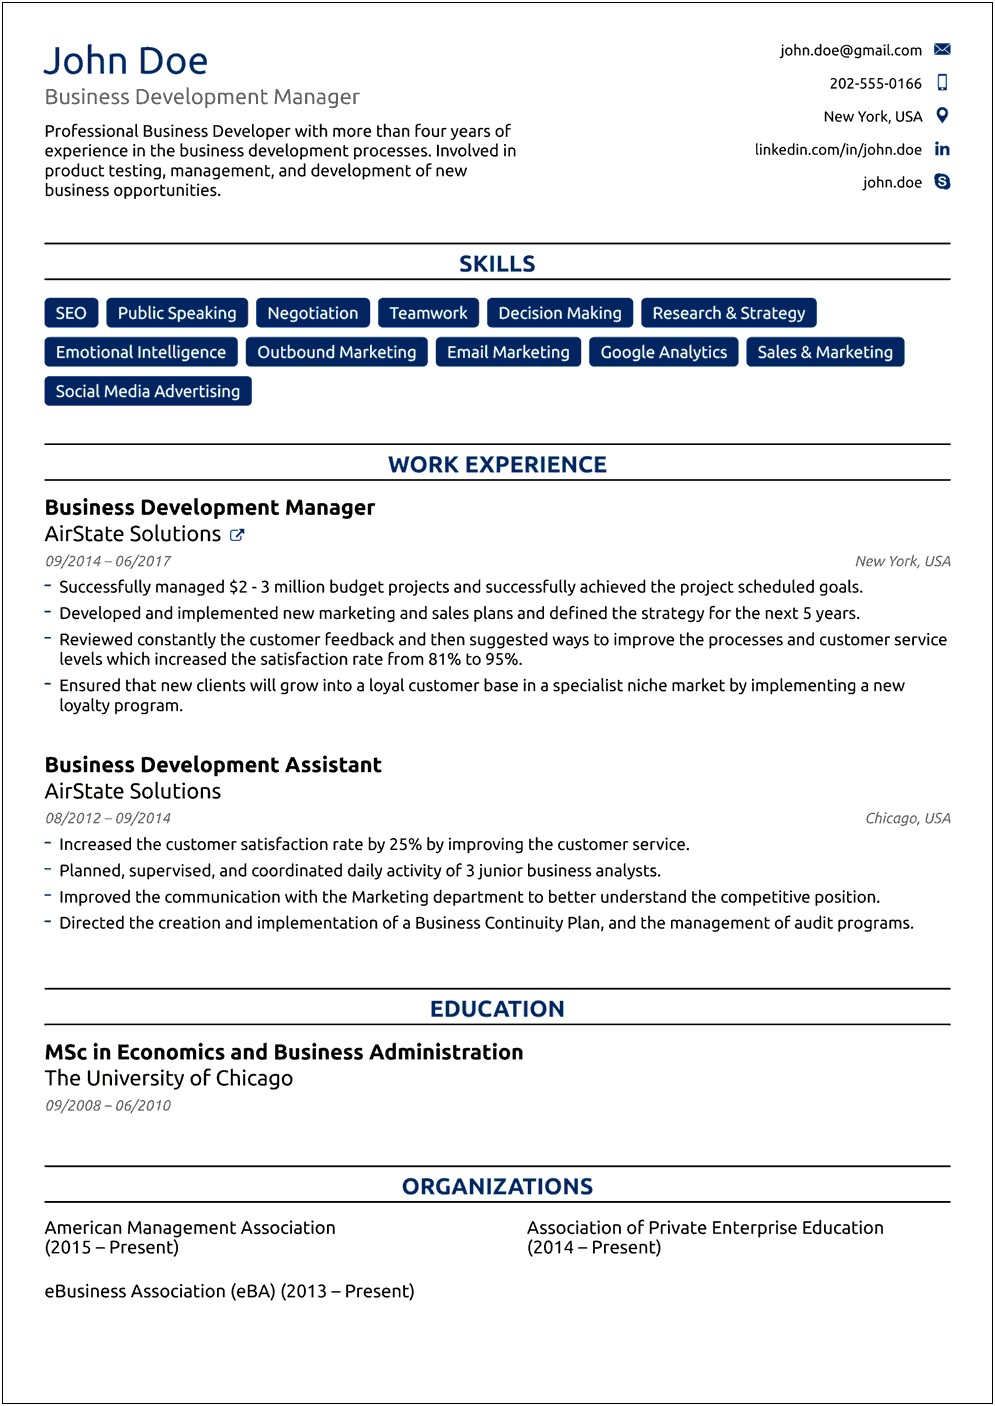 Latest Resume Format Free Download 2015